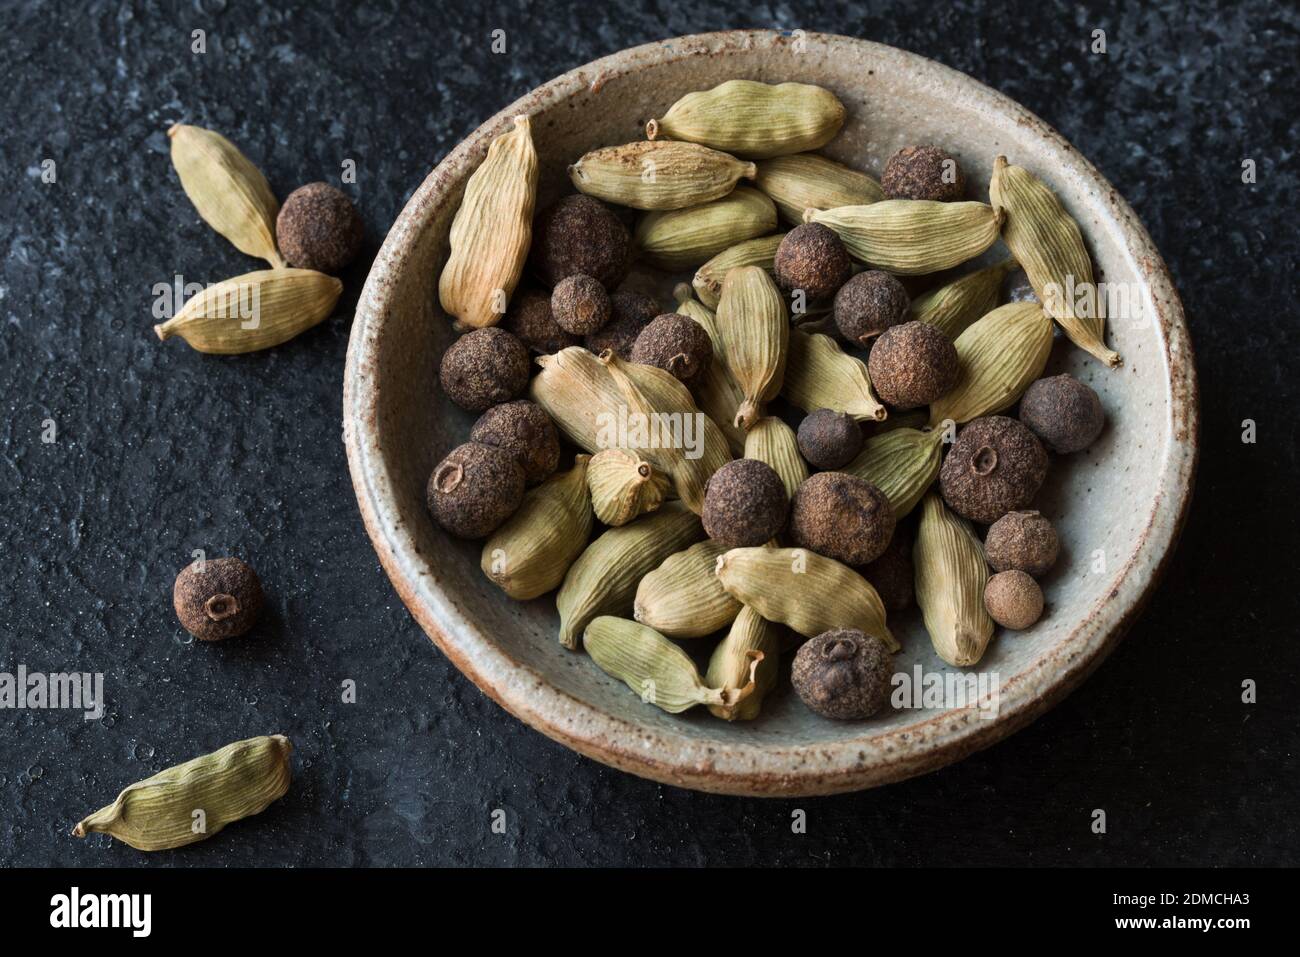 High Angle View Of Spices In Bowl On Table Stock Photo